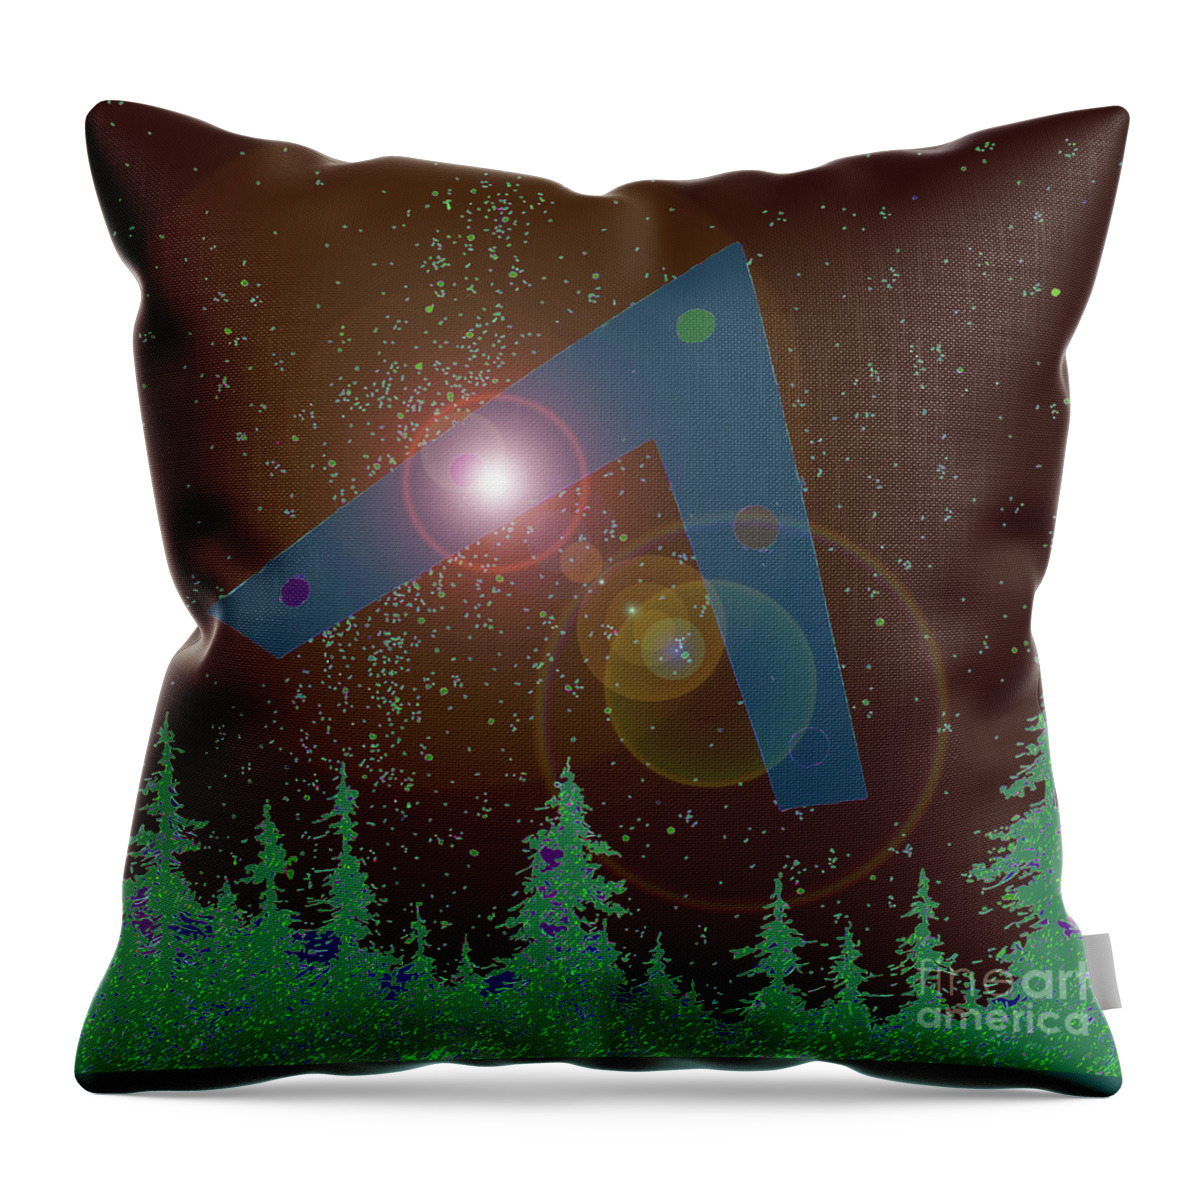 Phoenix Lights Ufo Throw Pillow featuring the painting Phoenix Lights UFO by James Williamson